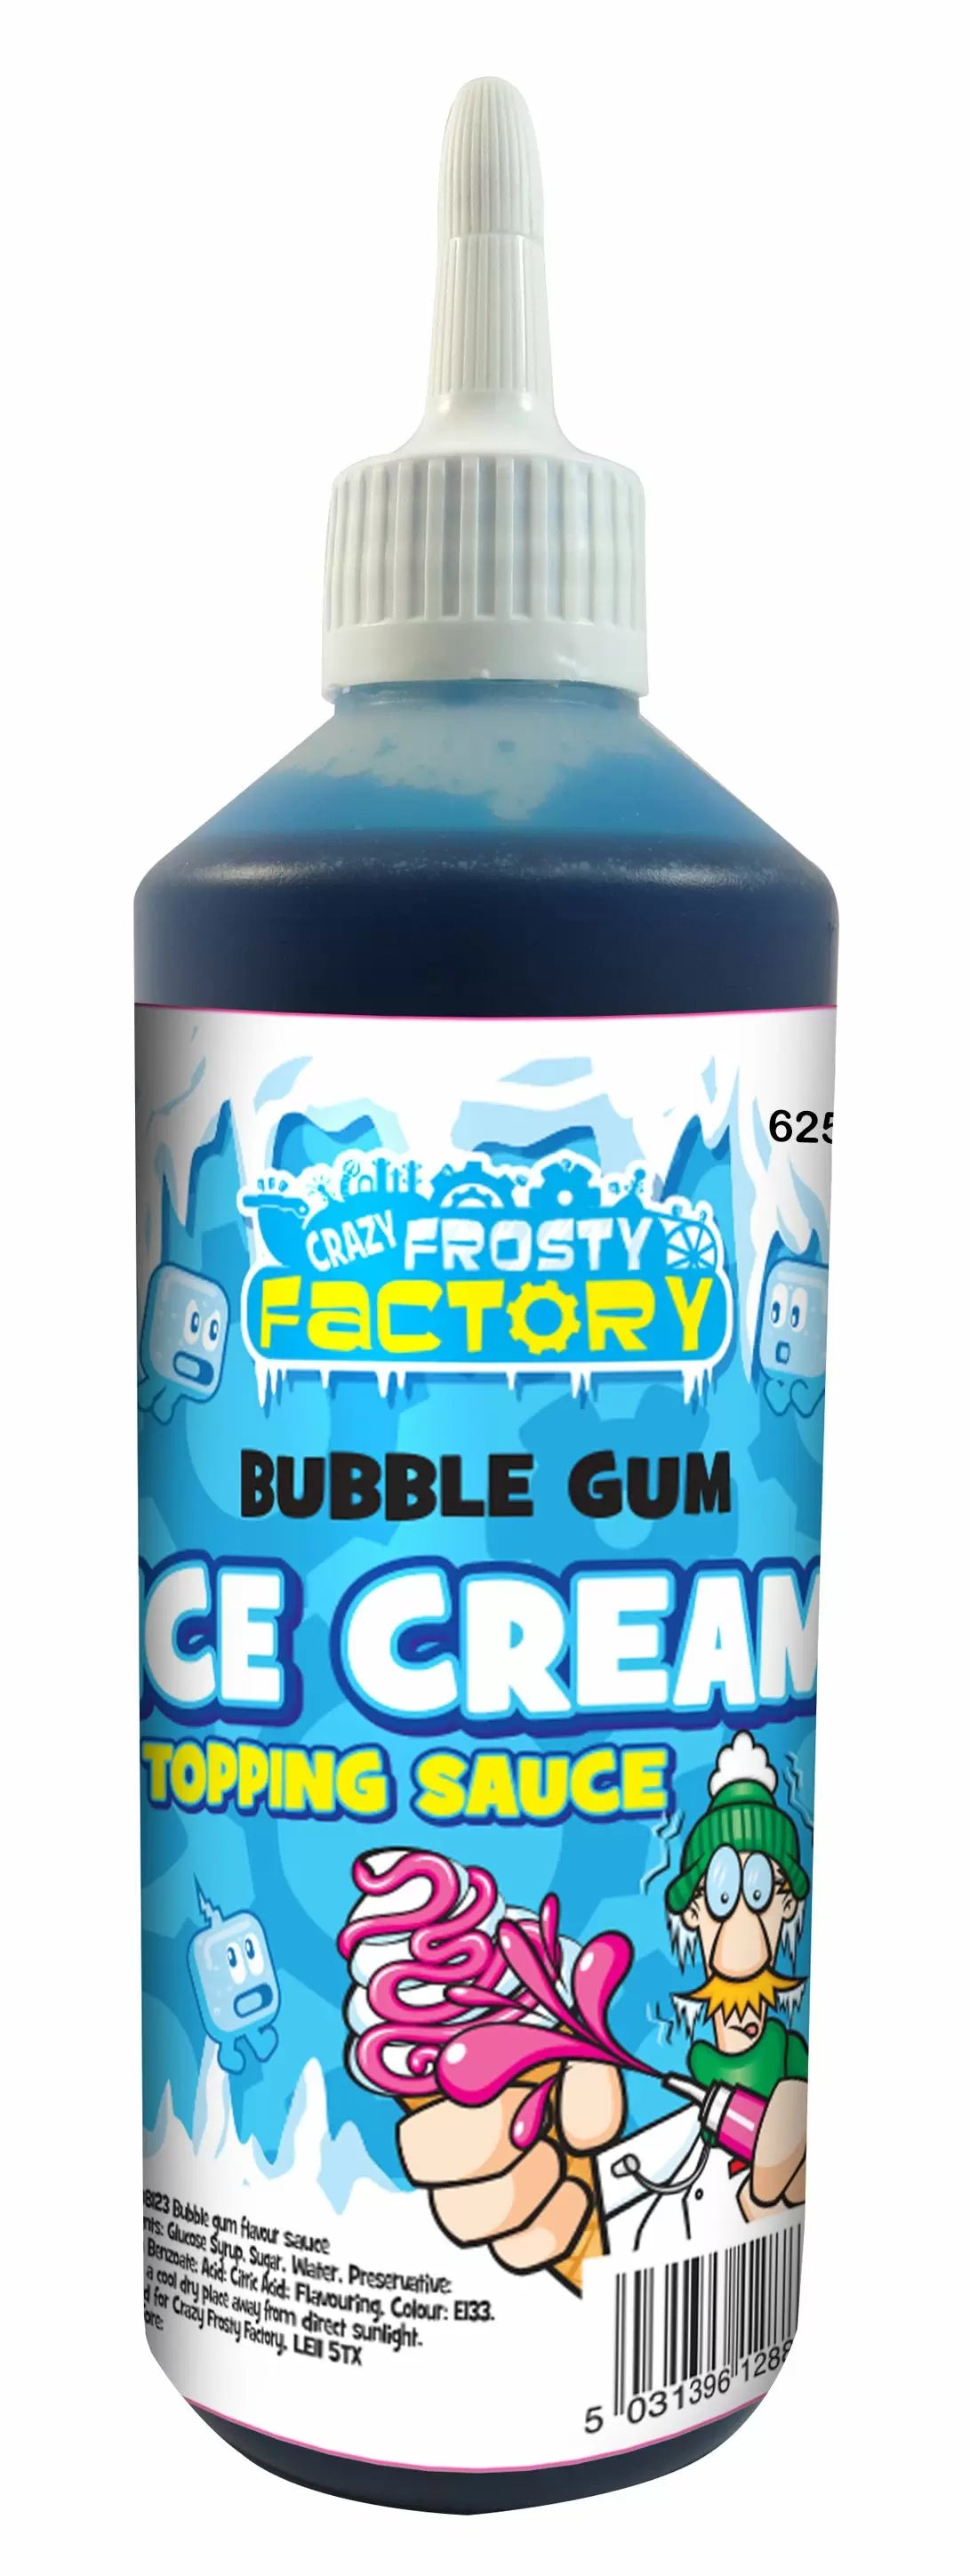 Crazy Frosty Factory Bubblegum Ice Cream Topping Sauce 625g